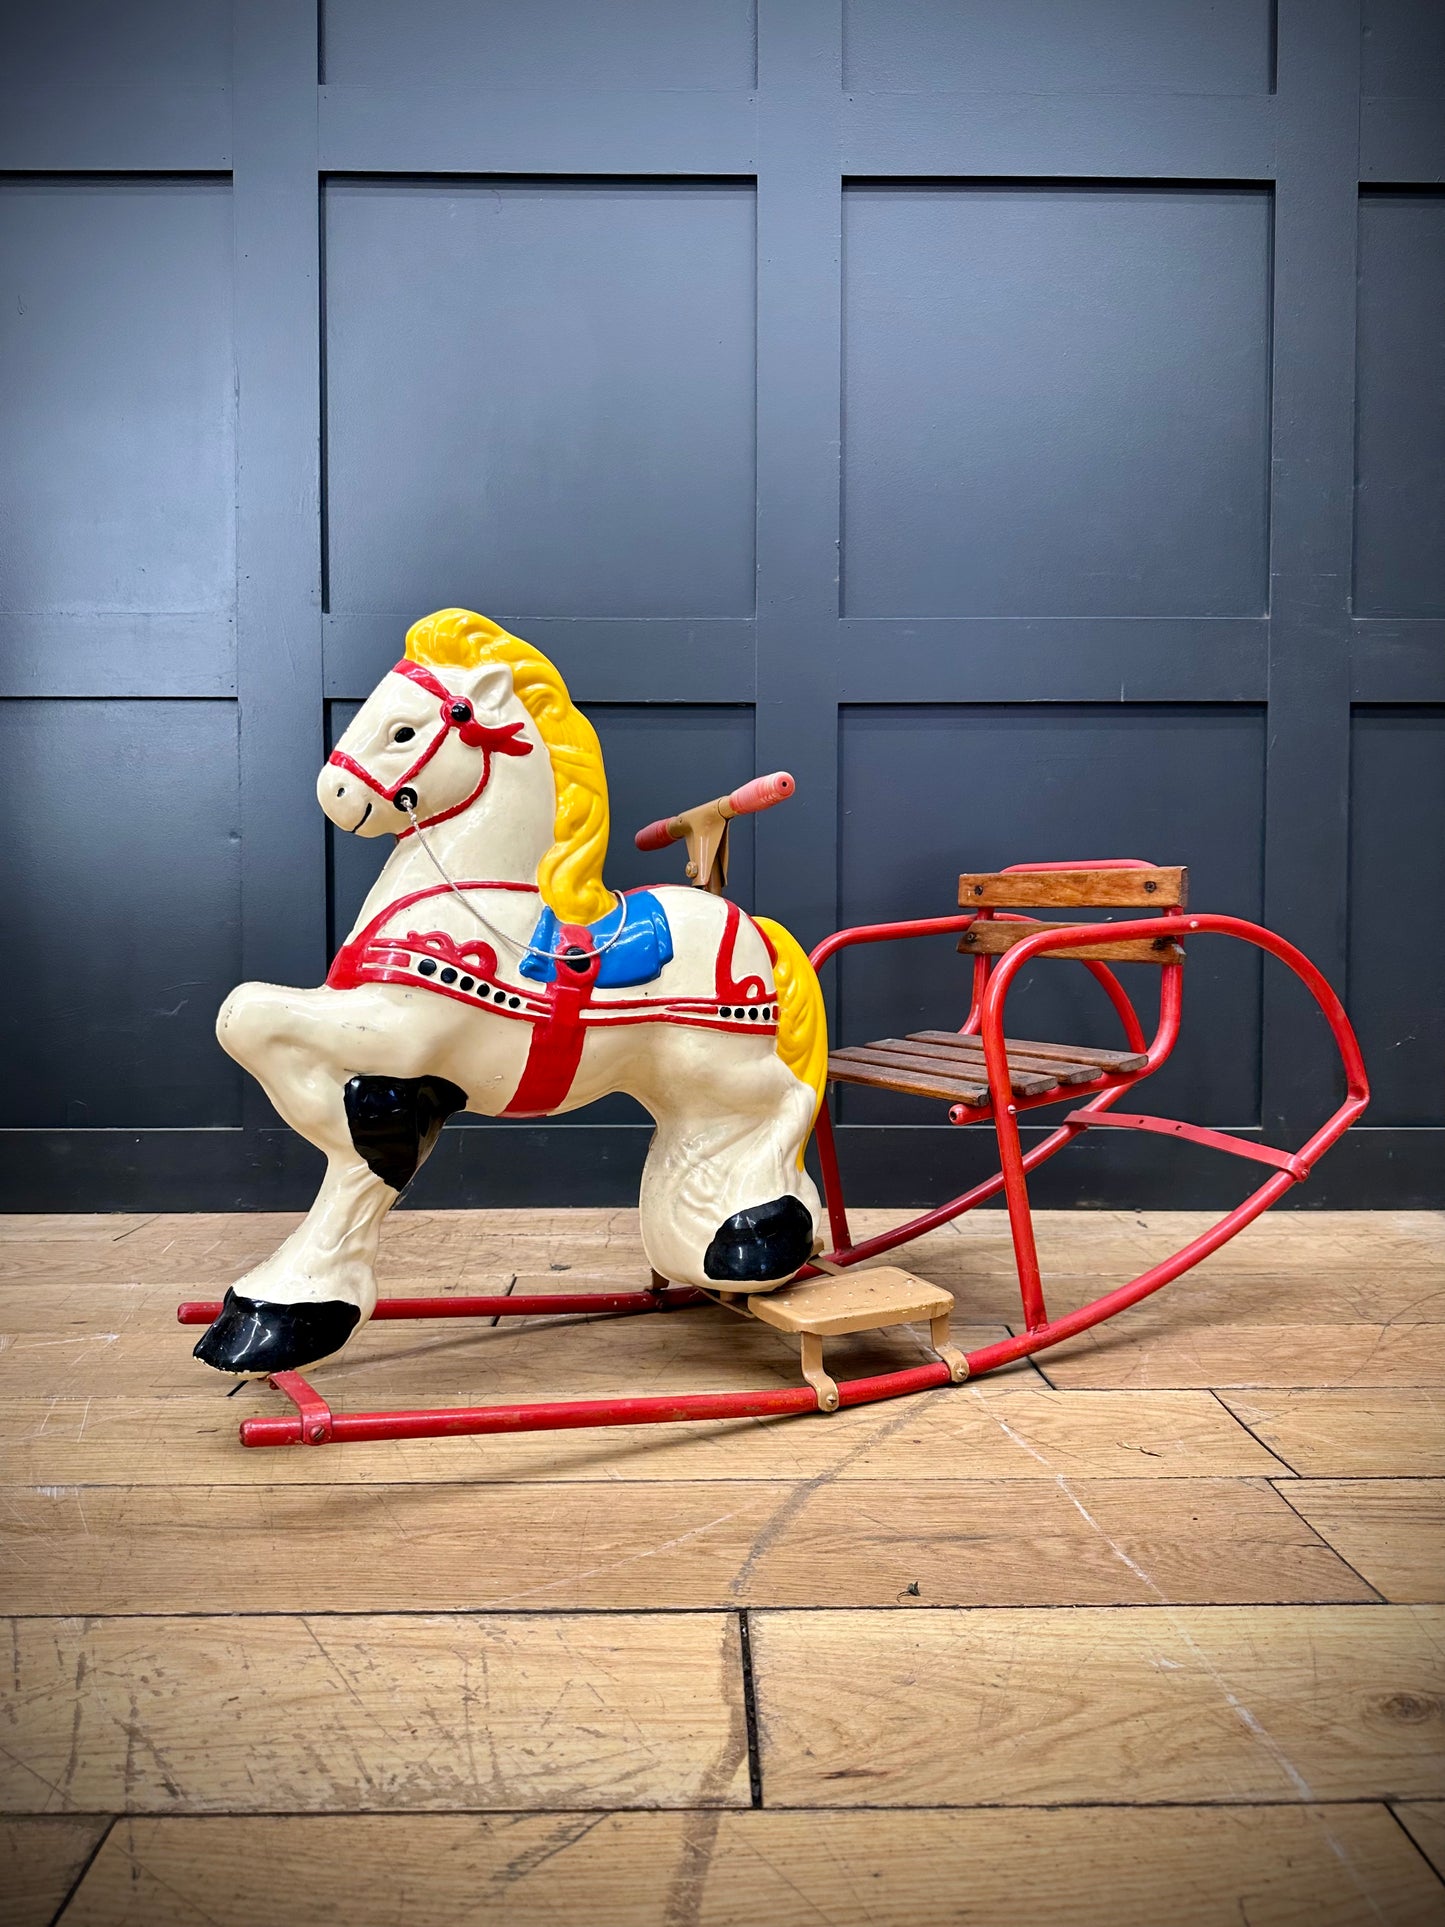 Vintage Childs Rocking Horse / Mid Century / Retro Childs Toy / Collectible